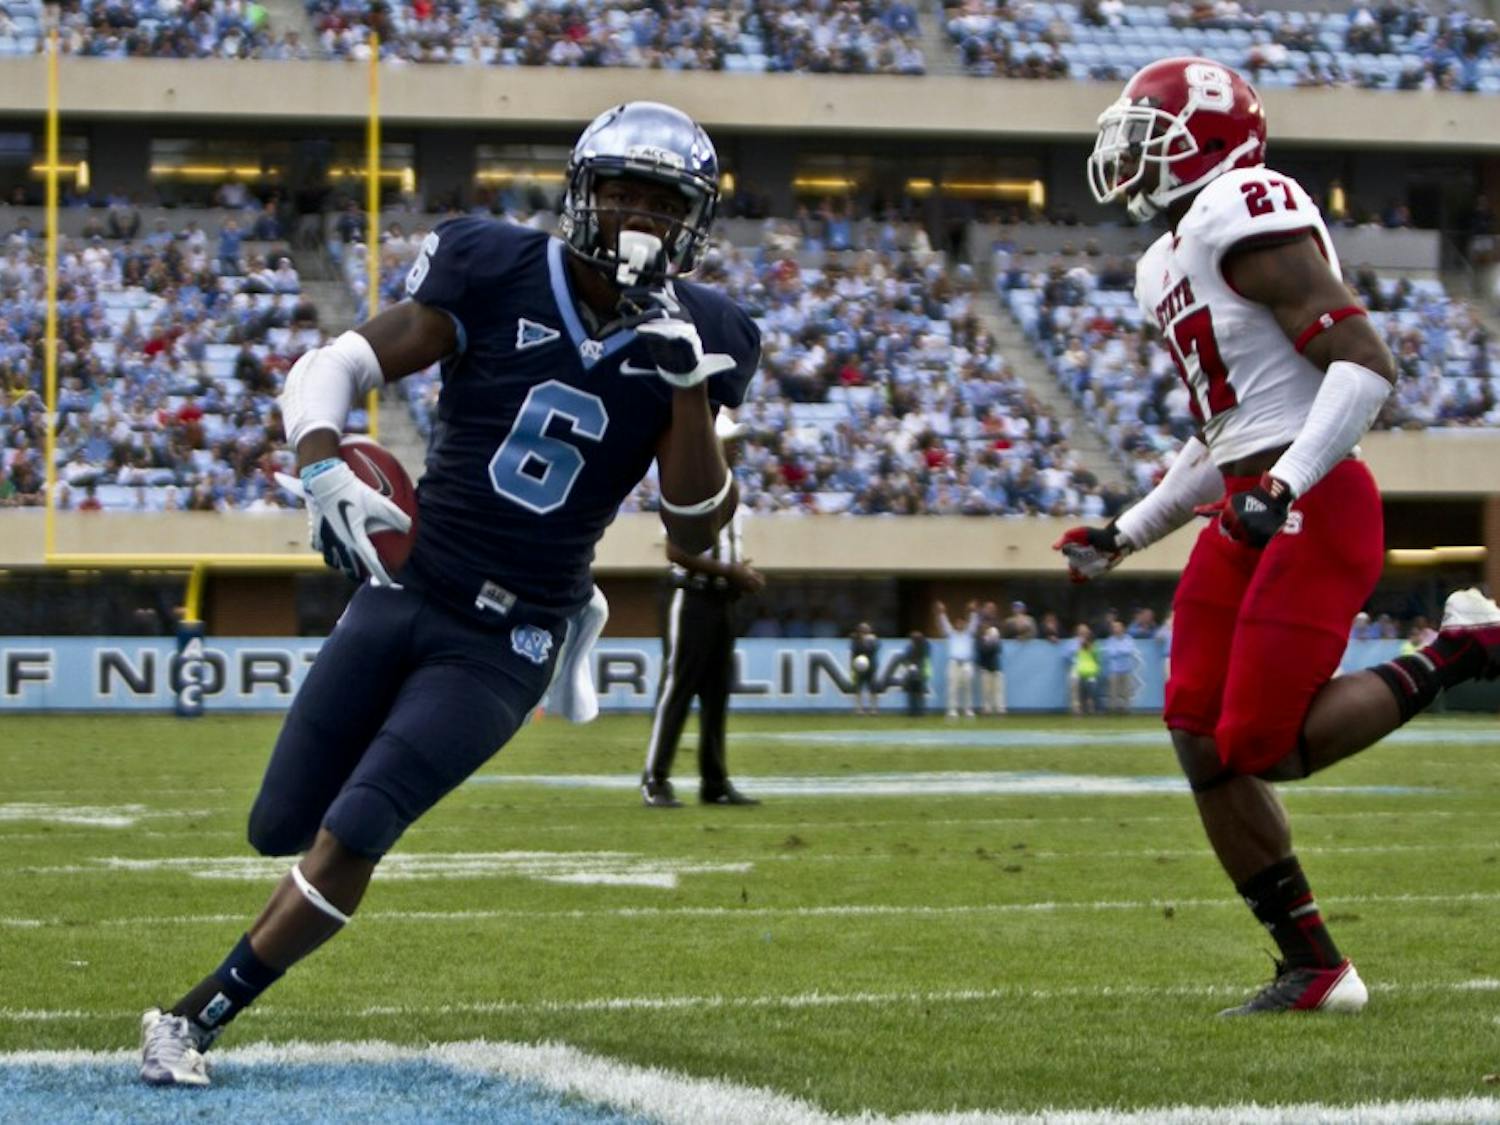 	UNC defeated NC State 43-35 on Friday in Chapel Hill.  The Tar Heels broke a five game losing streak against the Wolfpack.  